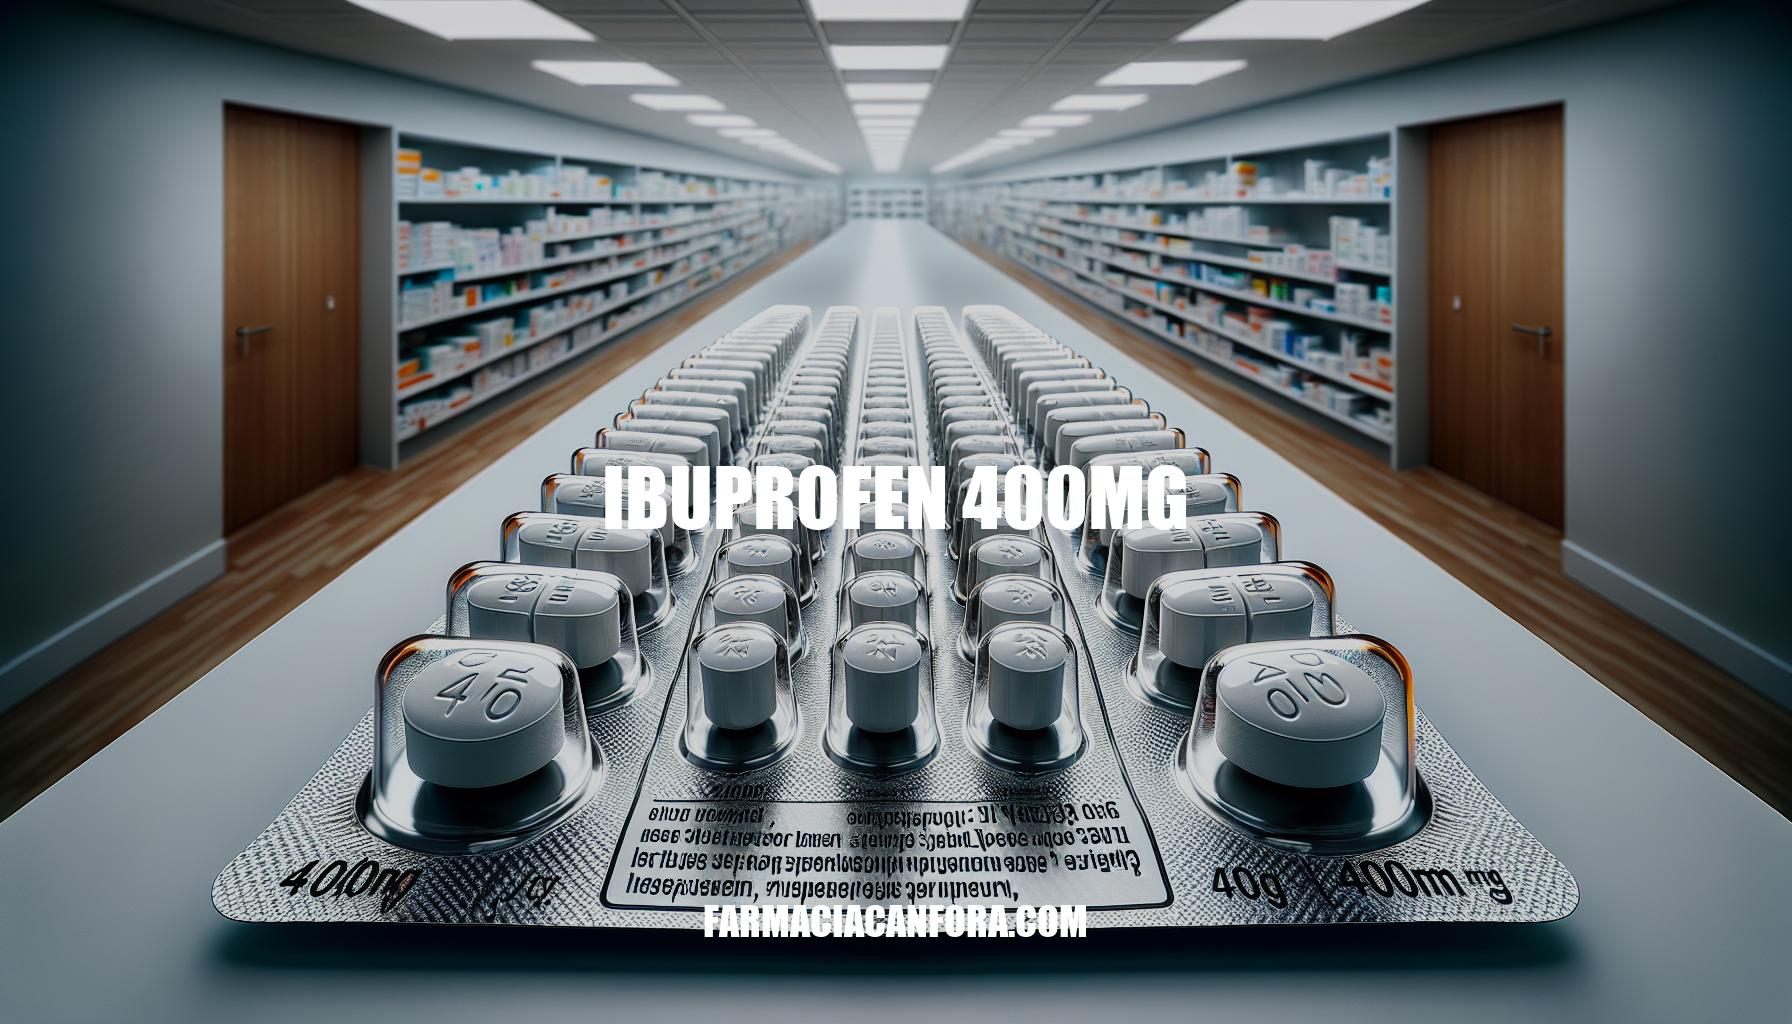 Ibuprofen 400mg: A Comprehensive Guide to Usage, Side Effects, and Alternatives